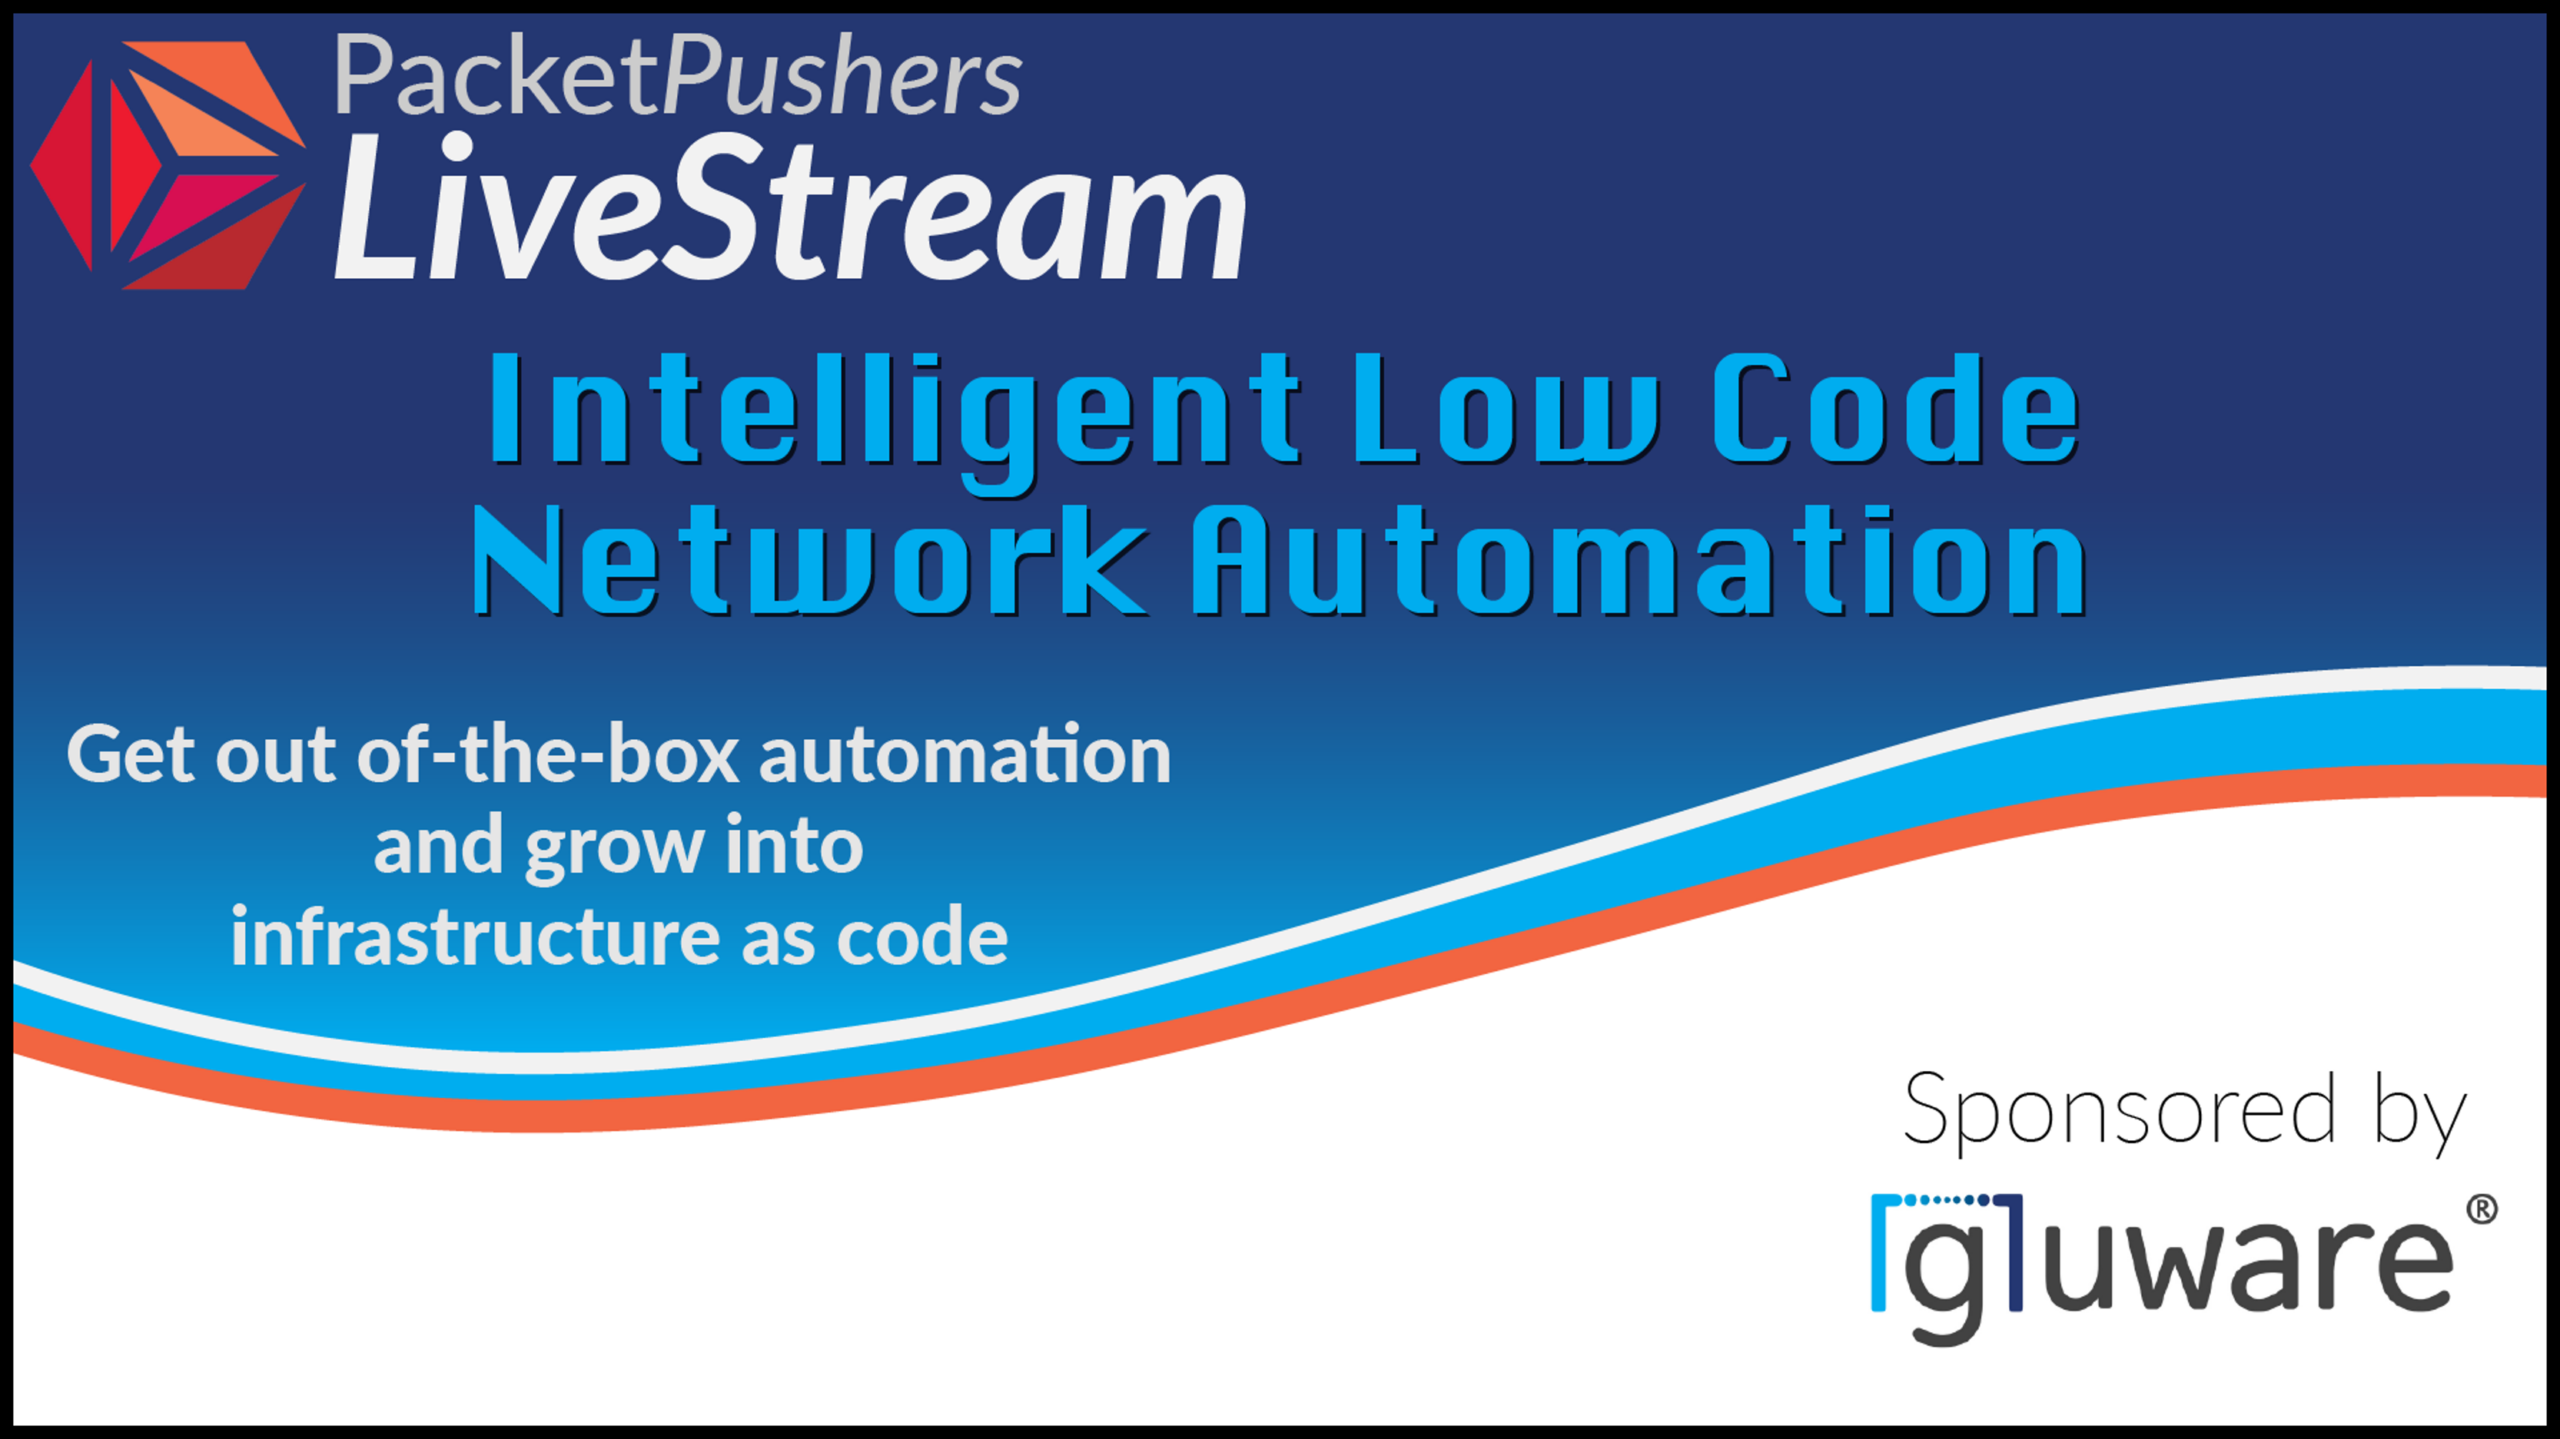 Packet Pushers Livestream | Intelligent Low Code Network Automation: Get out of-the-box automation and grow into infrastructure as code - Ad no date